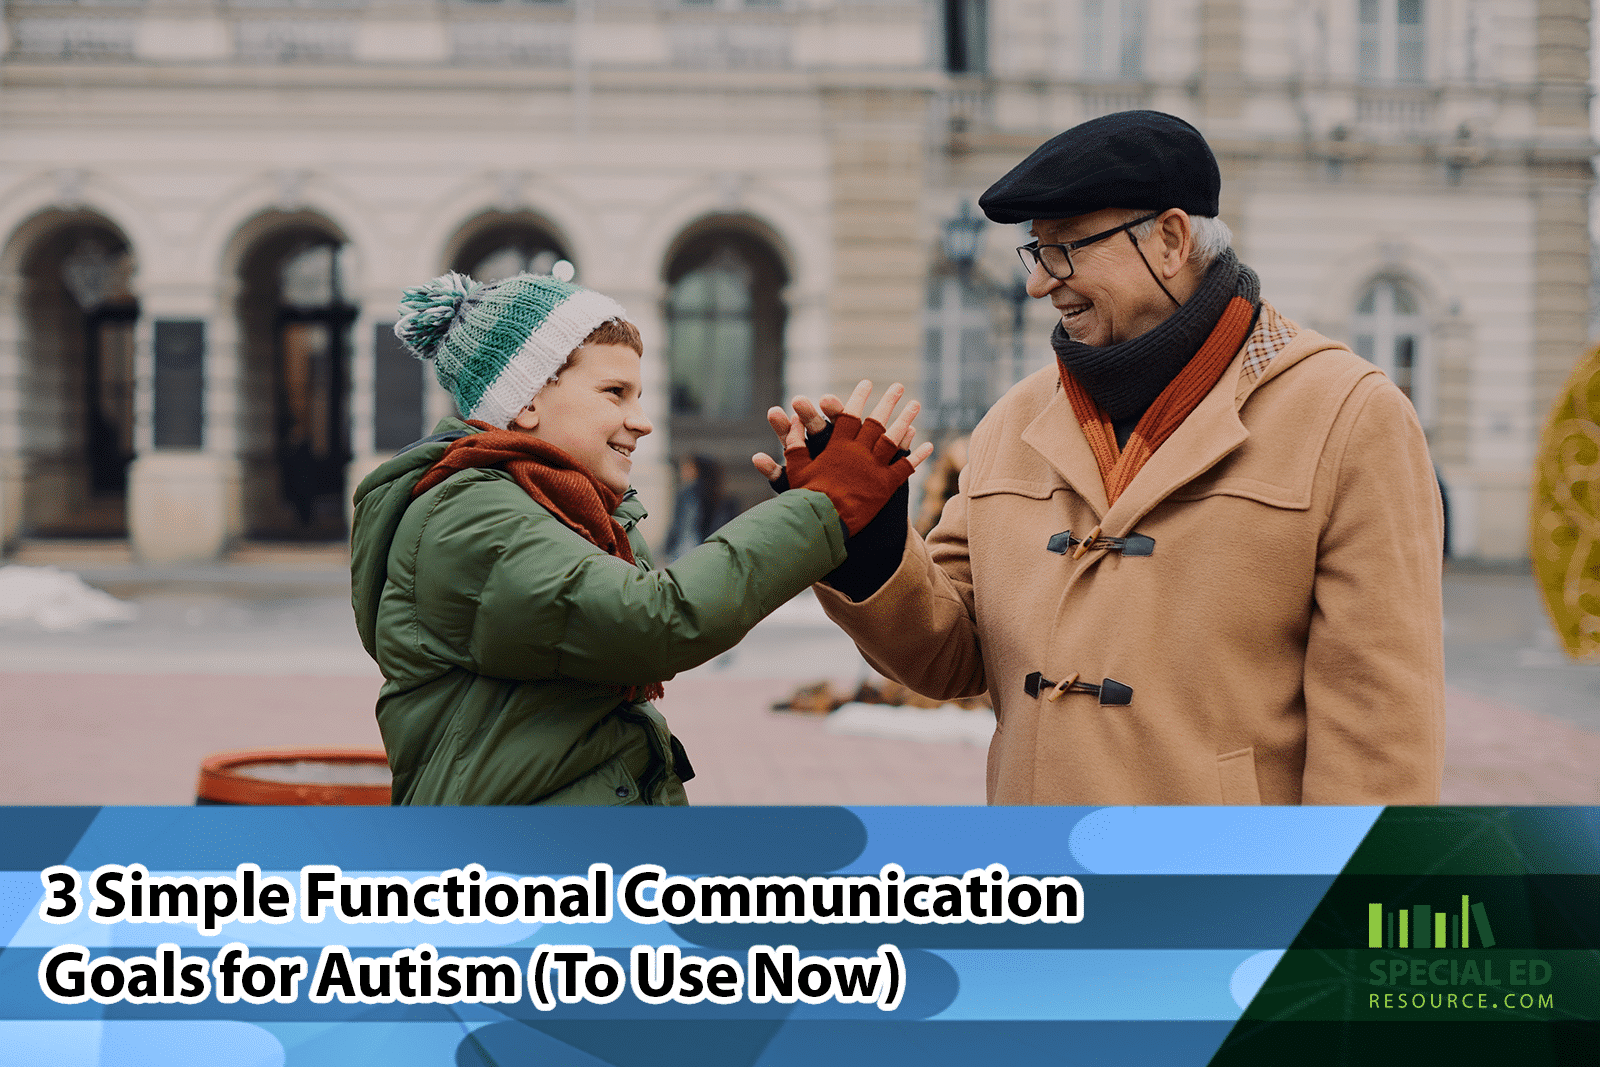 Young autistic boy practicing one of his functional communication goals by shaking his grandfather’s hand outside in the winter.